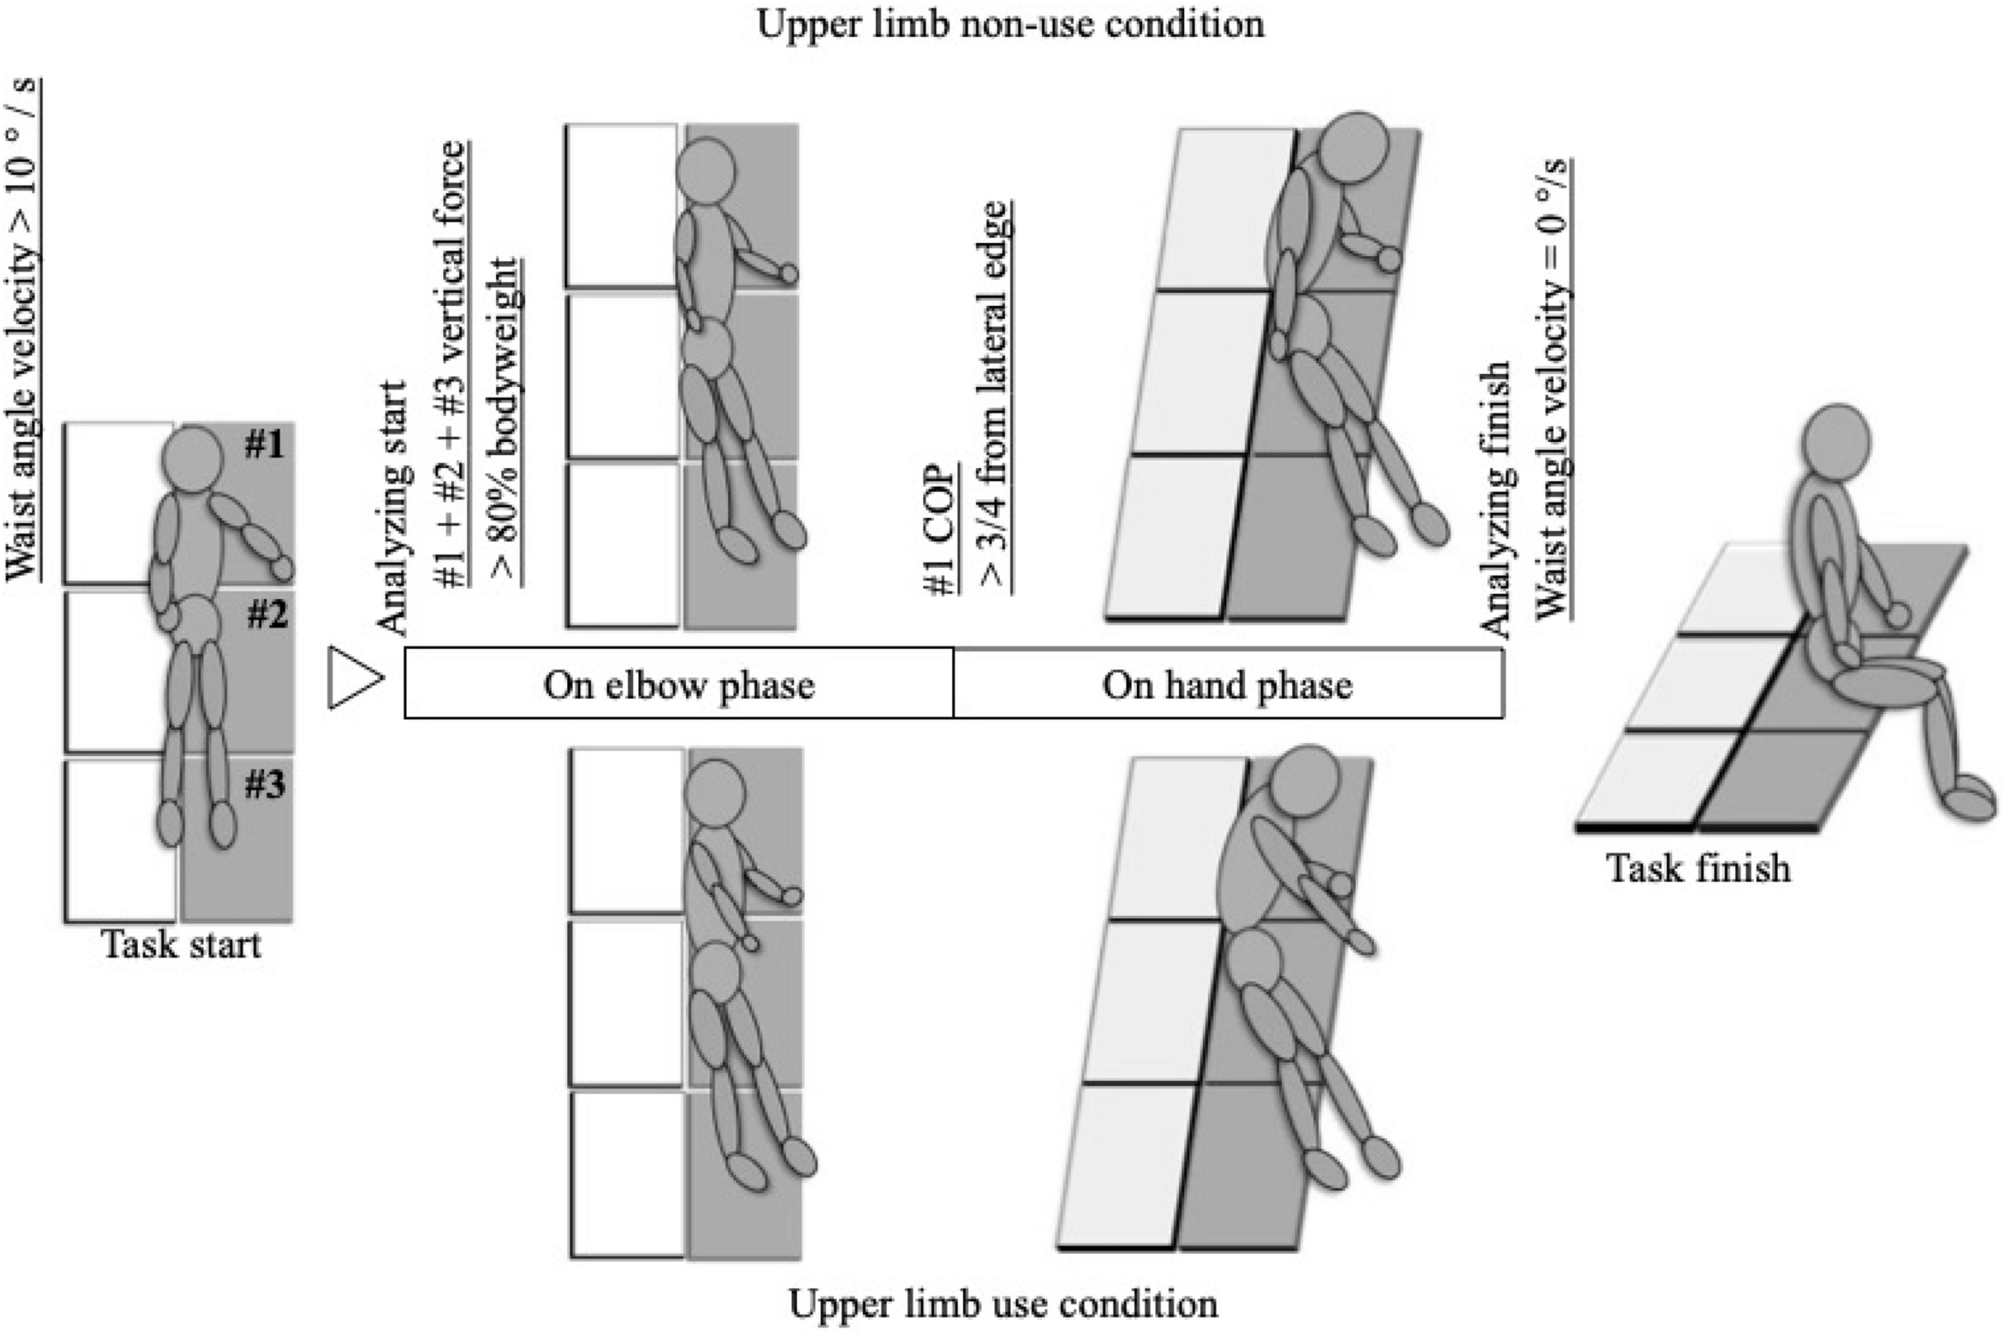 Role of raising the upper limb of the non-rising side when performing  rising movements from bed